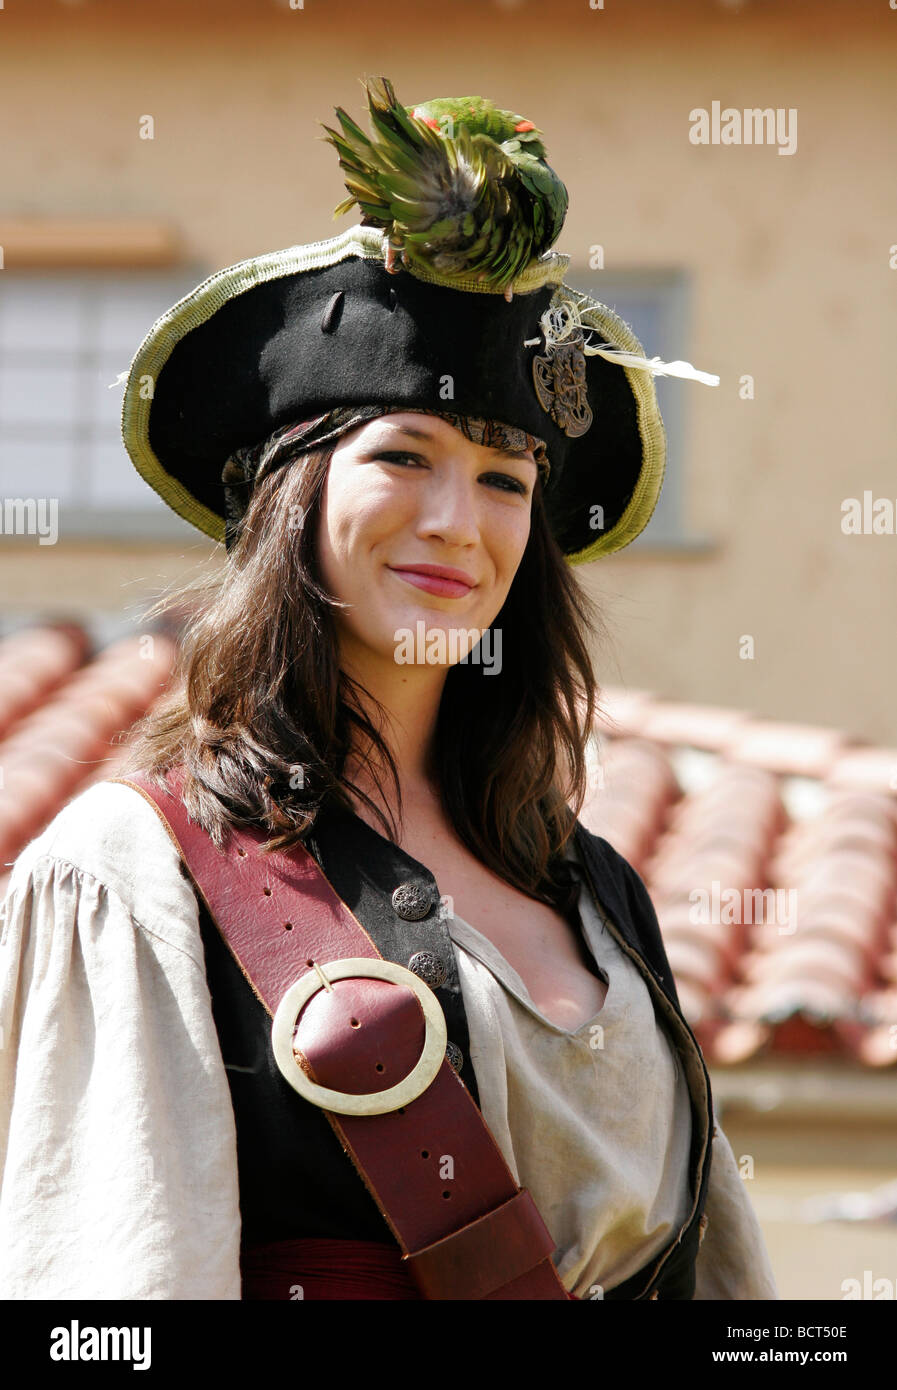 Female pirate with a parrot on her hat Stock Photo